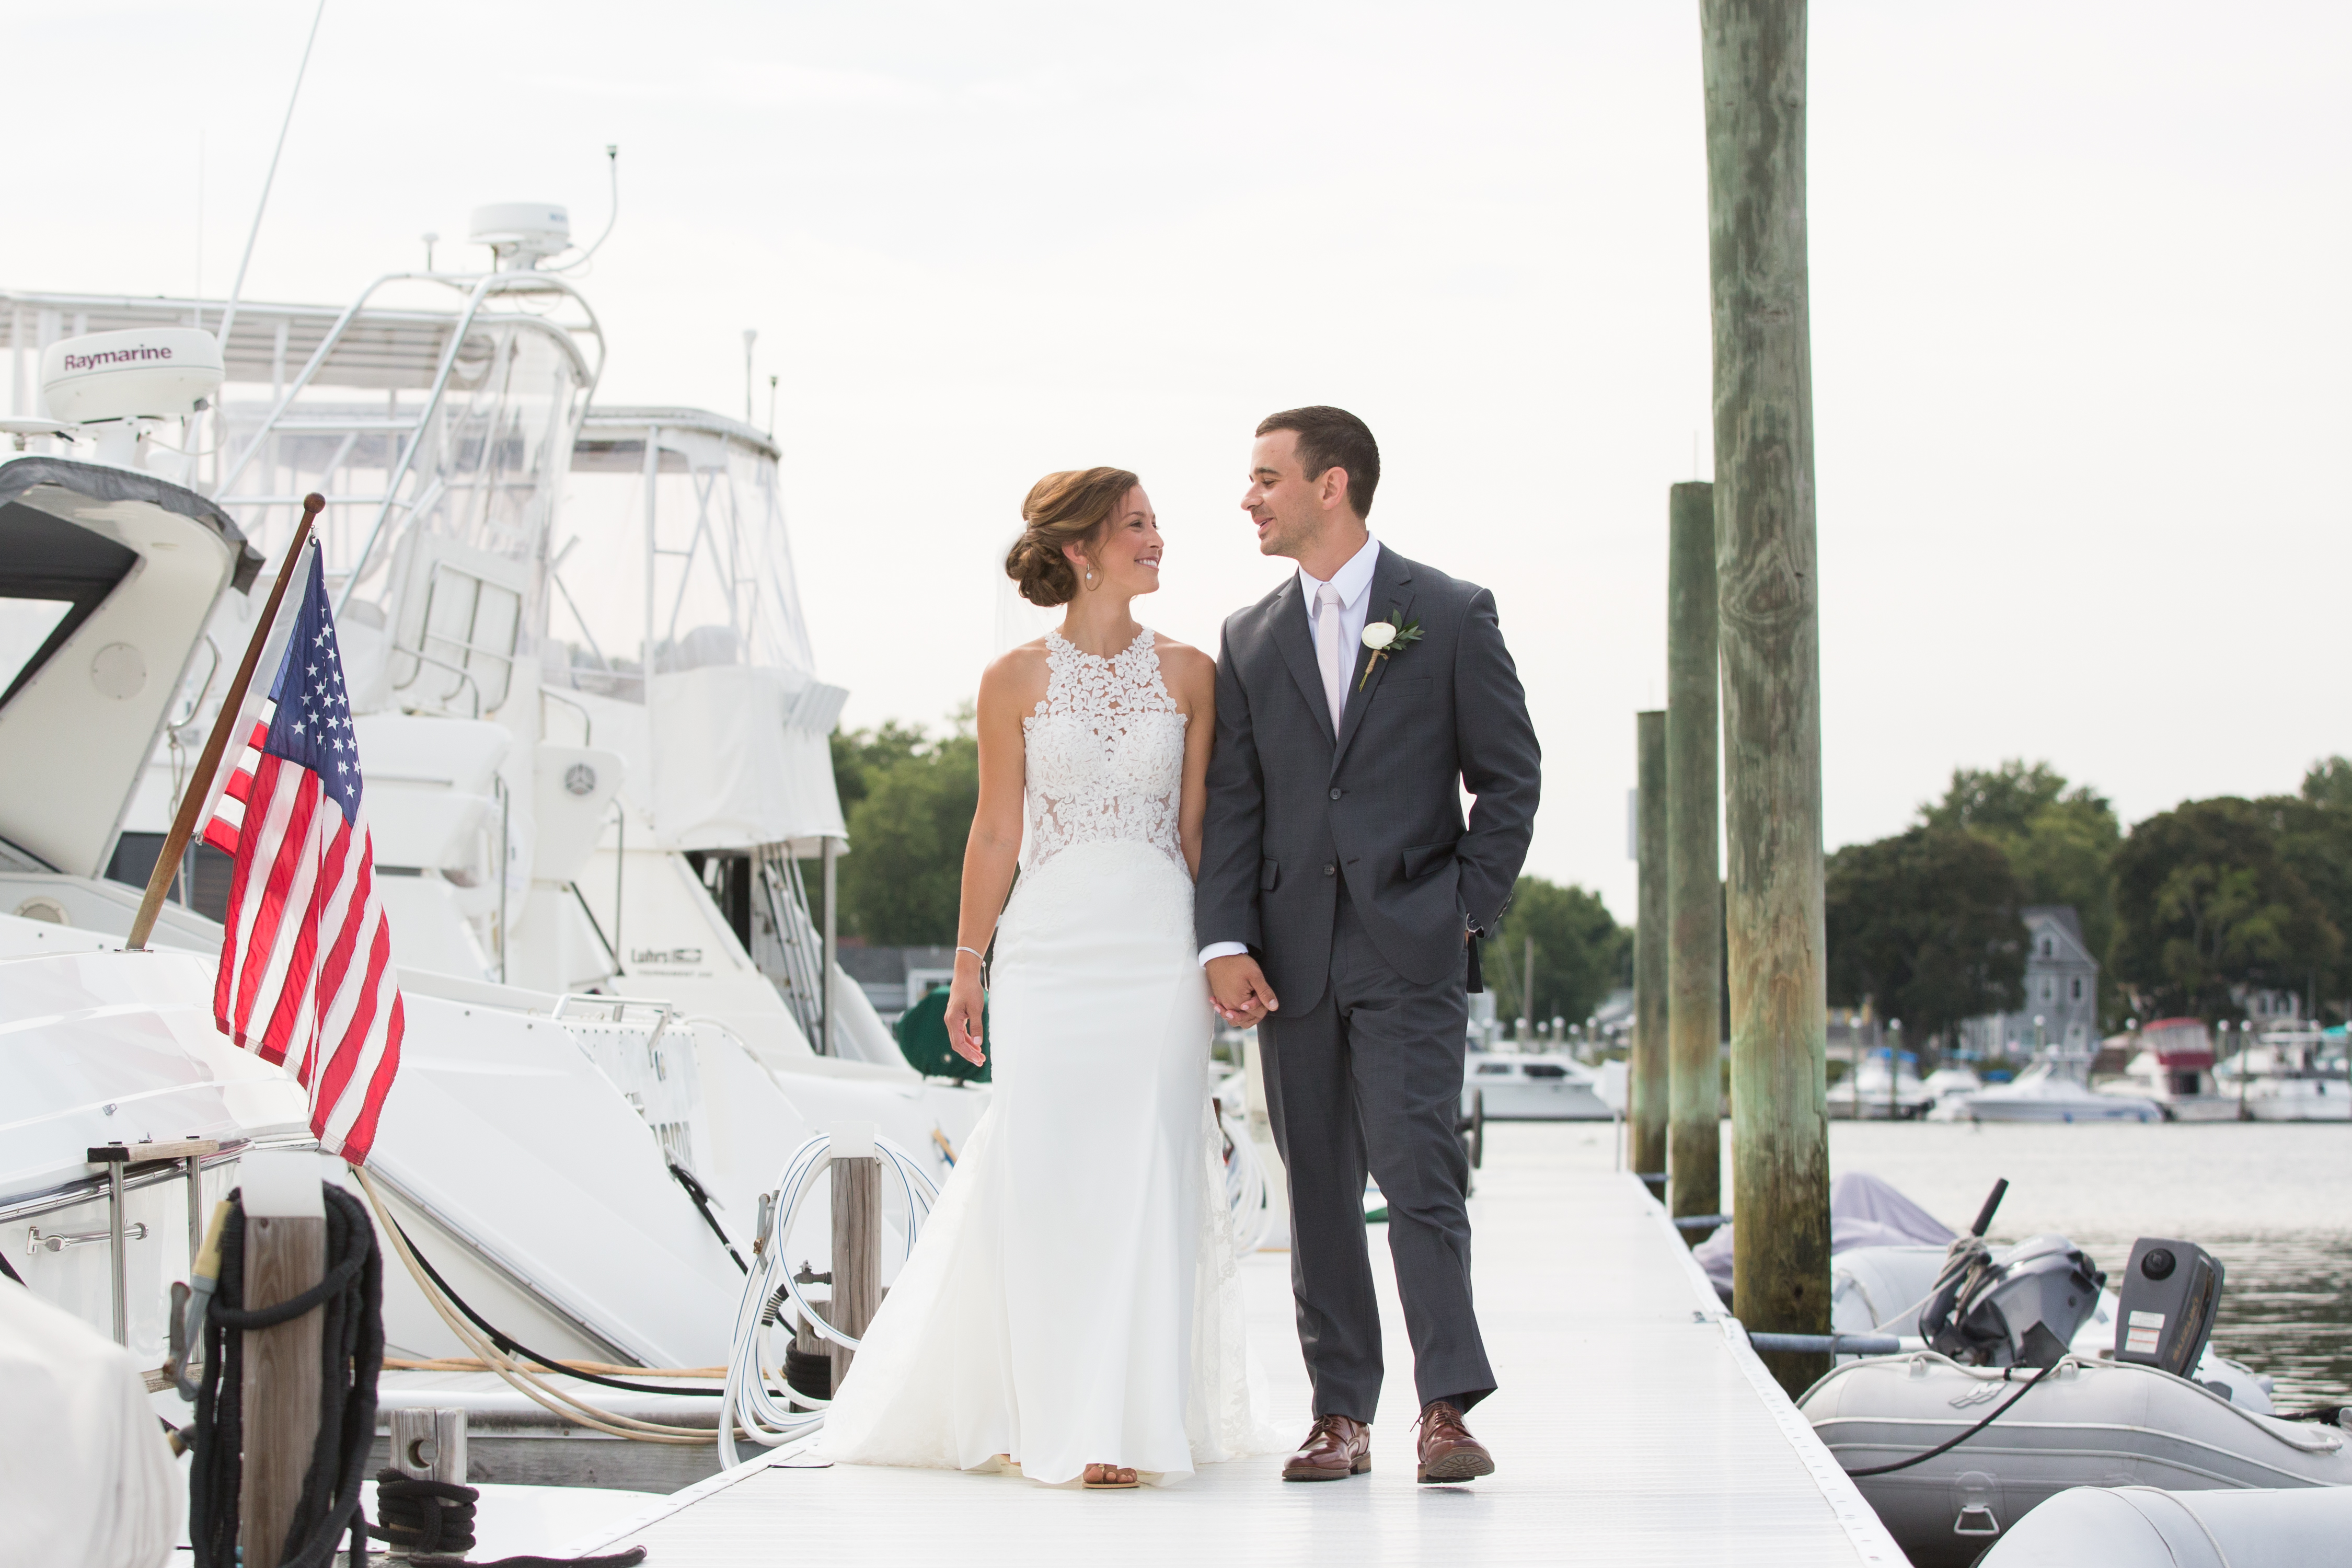 A bride and groom share an intimate first look on the docks of Harbor Lights in Warwick Rhode Island.